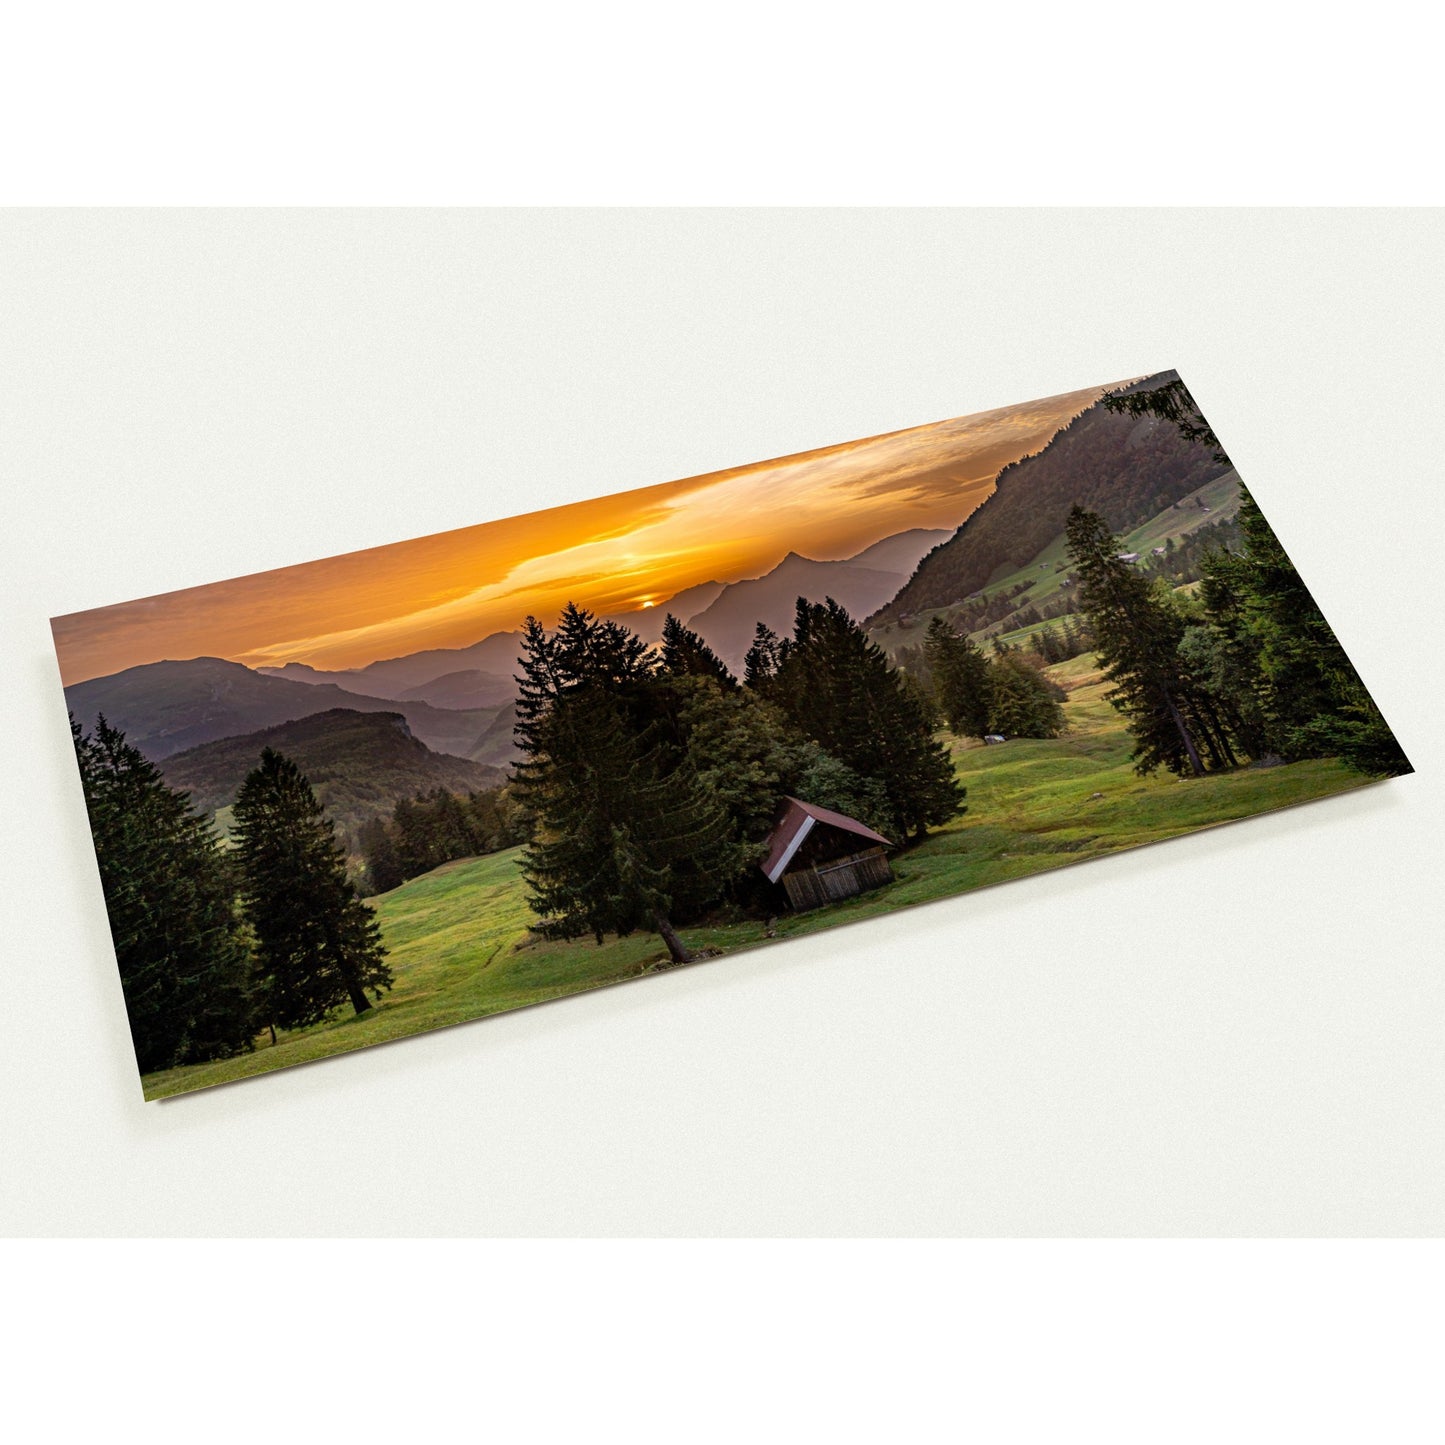 Sunset on the Ibergeregg Set of 10 cards (2-sided, with envelopes)